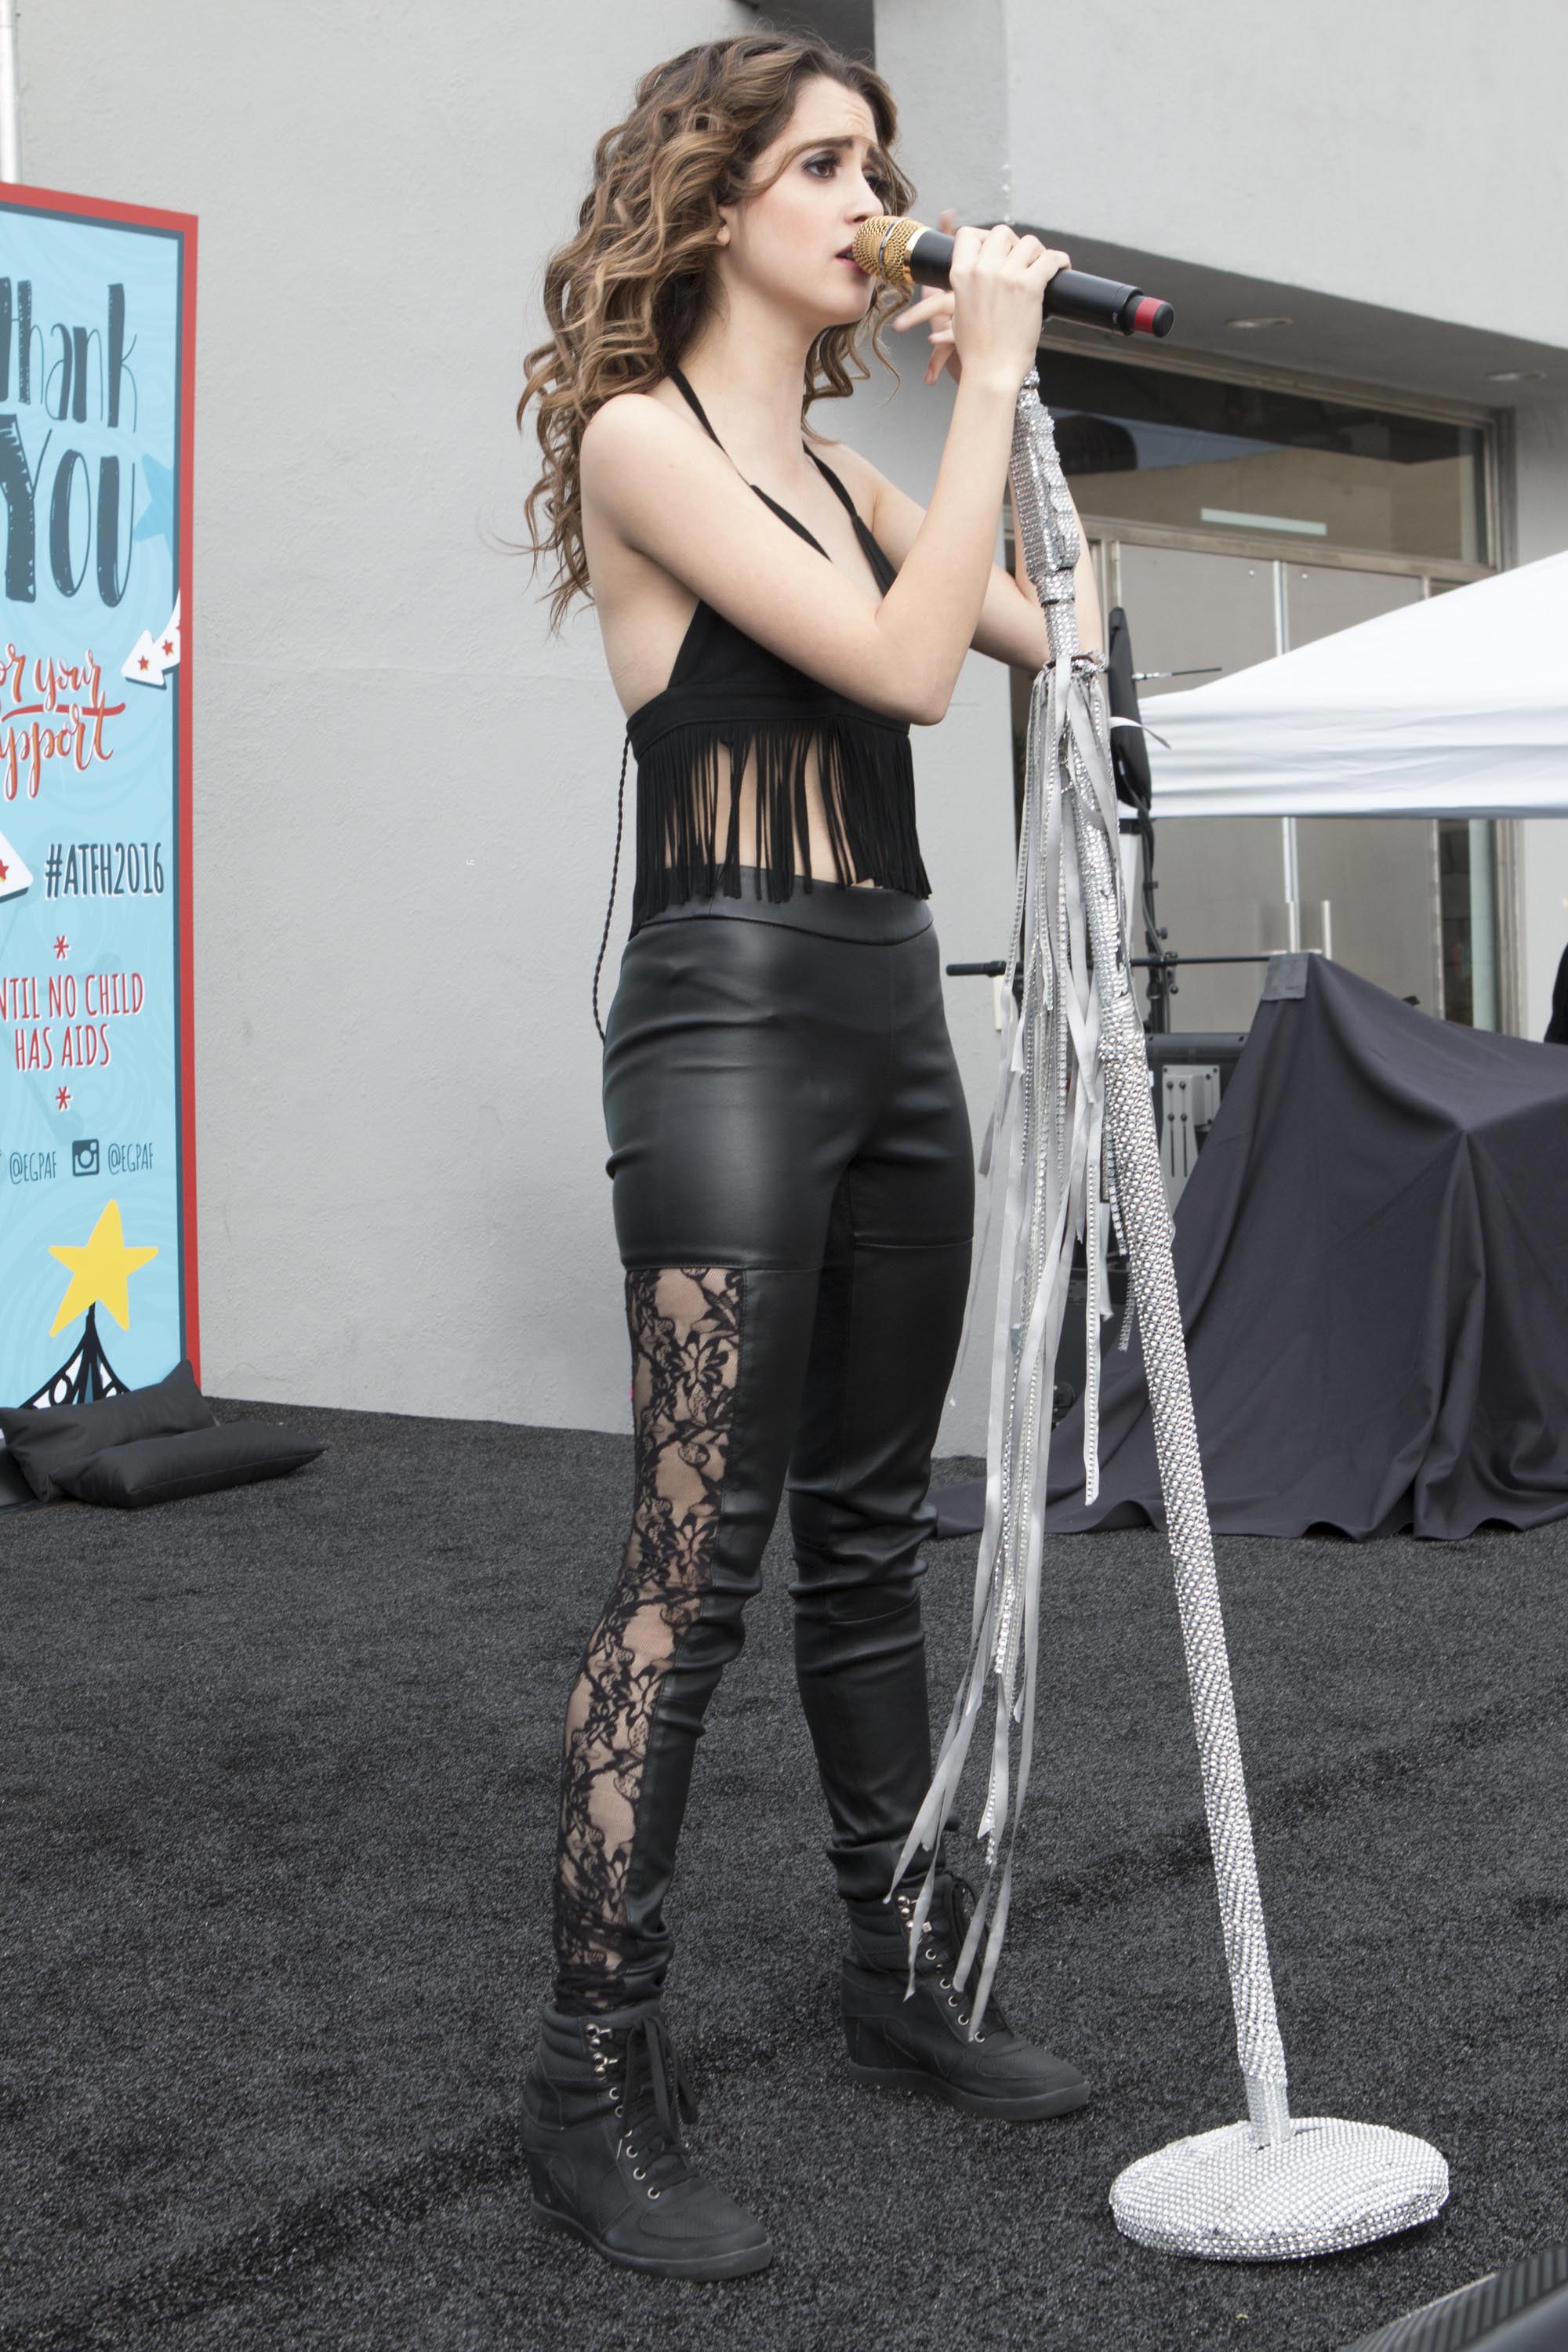 Laura Marano performs at Elizabeth Glaser Pediatric Aids Foundation A Time For Heroes festival